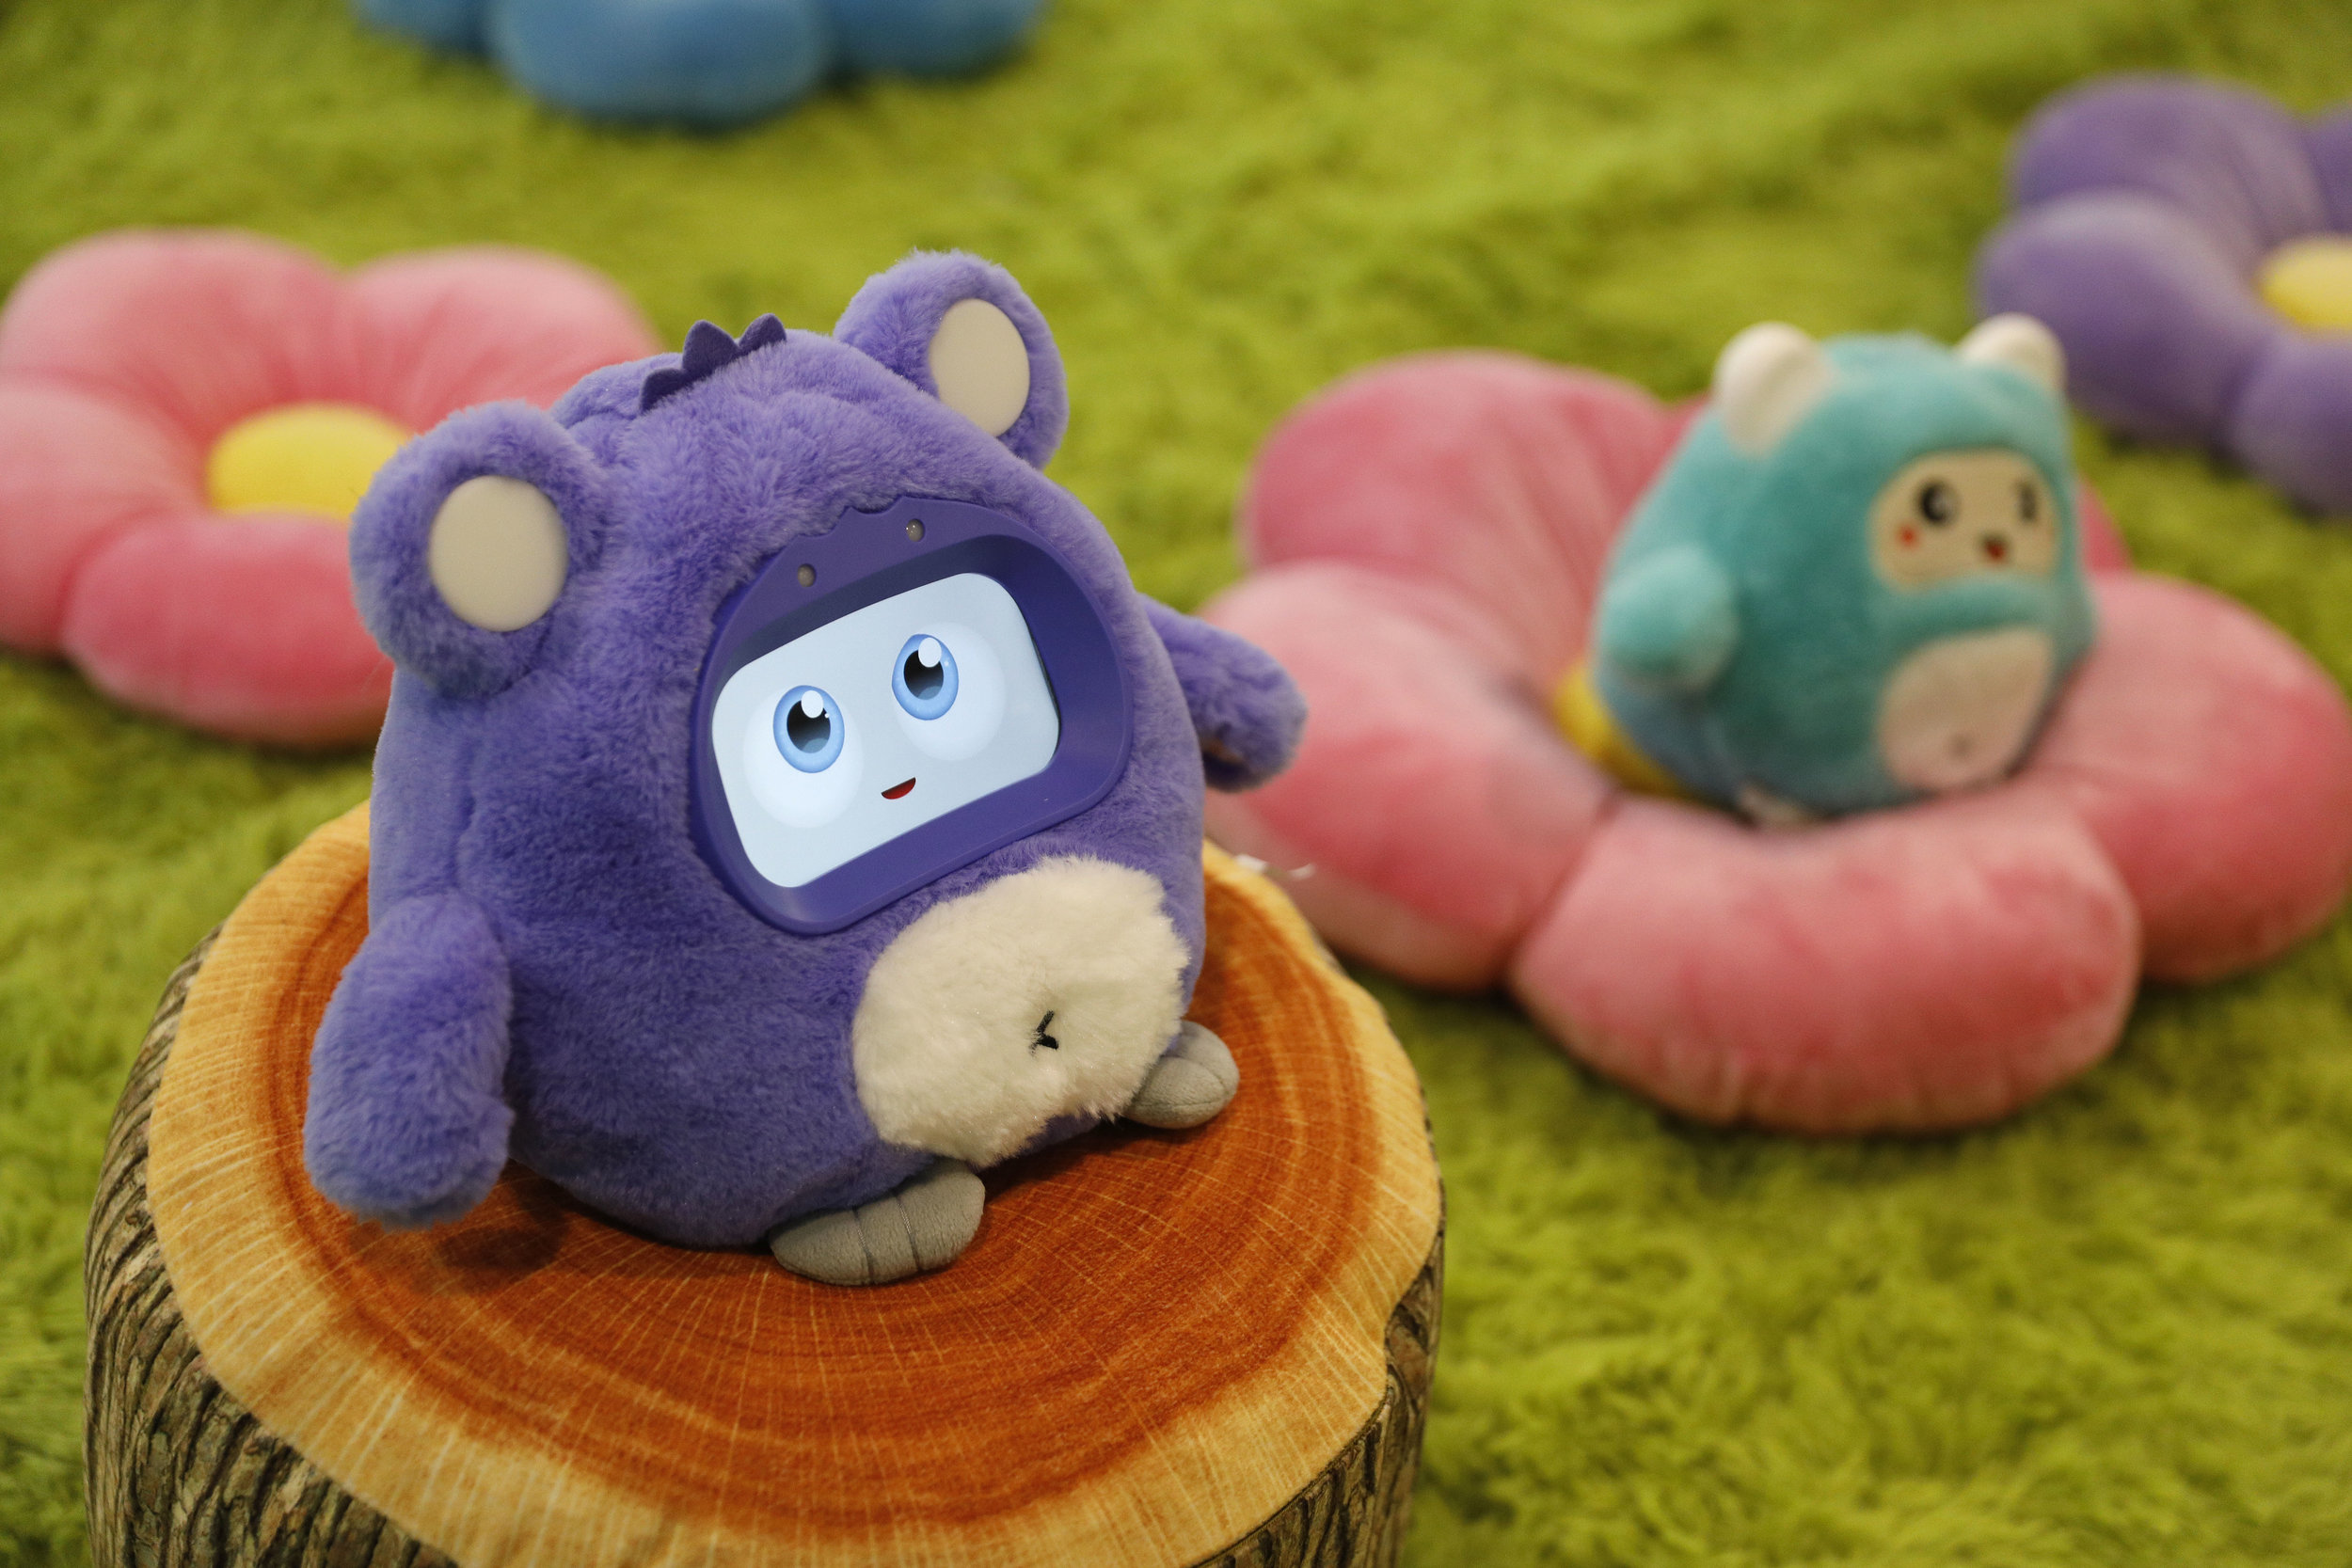 A Woobo talking robot is on display at the Woobo booth at CES  International, Wednesday, Jan. 9, 2019, in Las Vegas. (AP Photo/John  Locher)